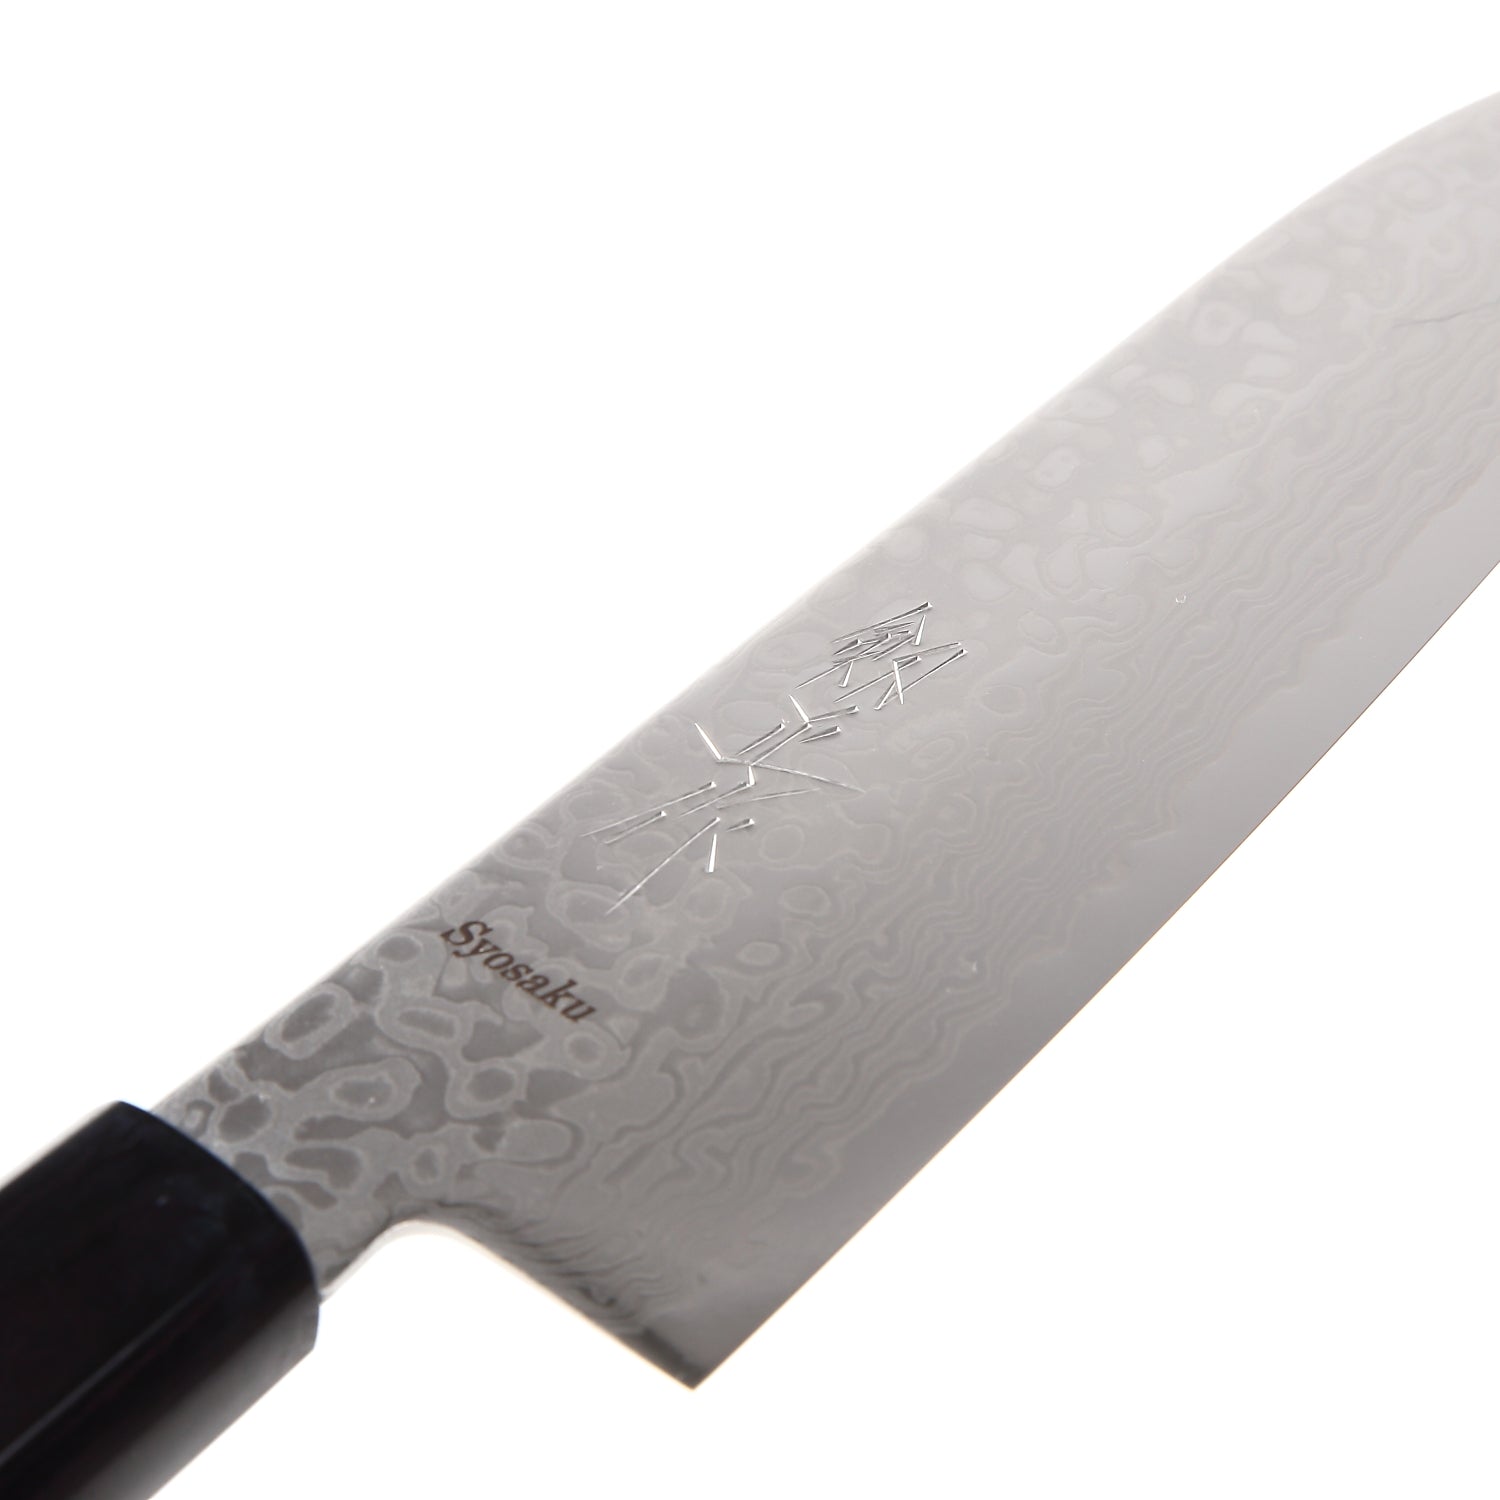 This Japanese chef knife set is on sale for over 50% off